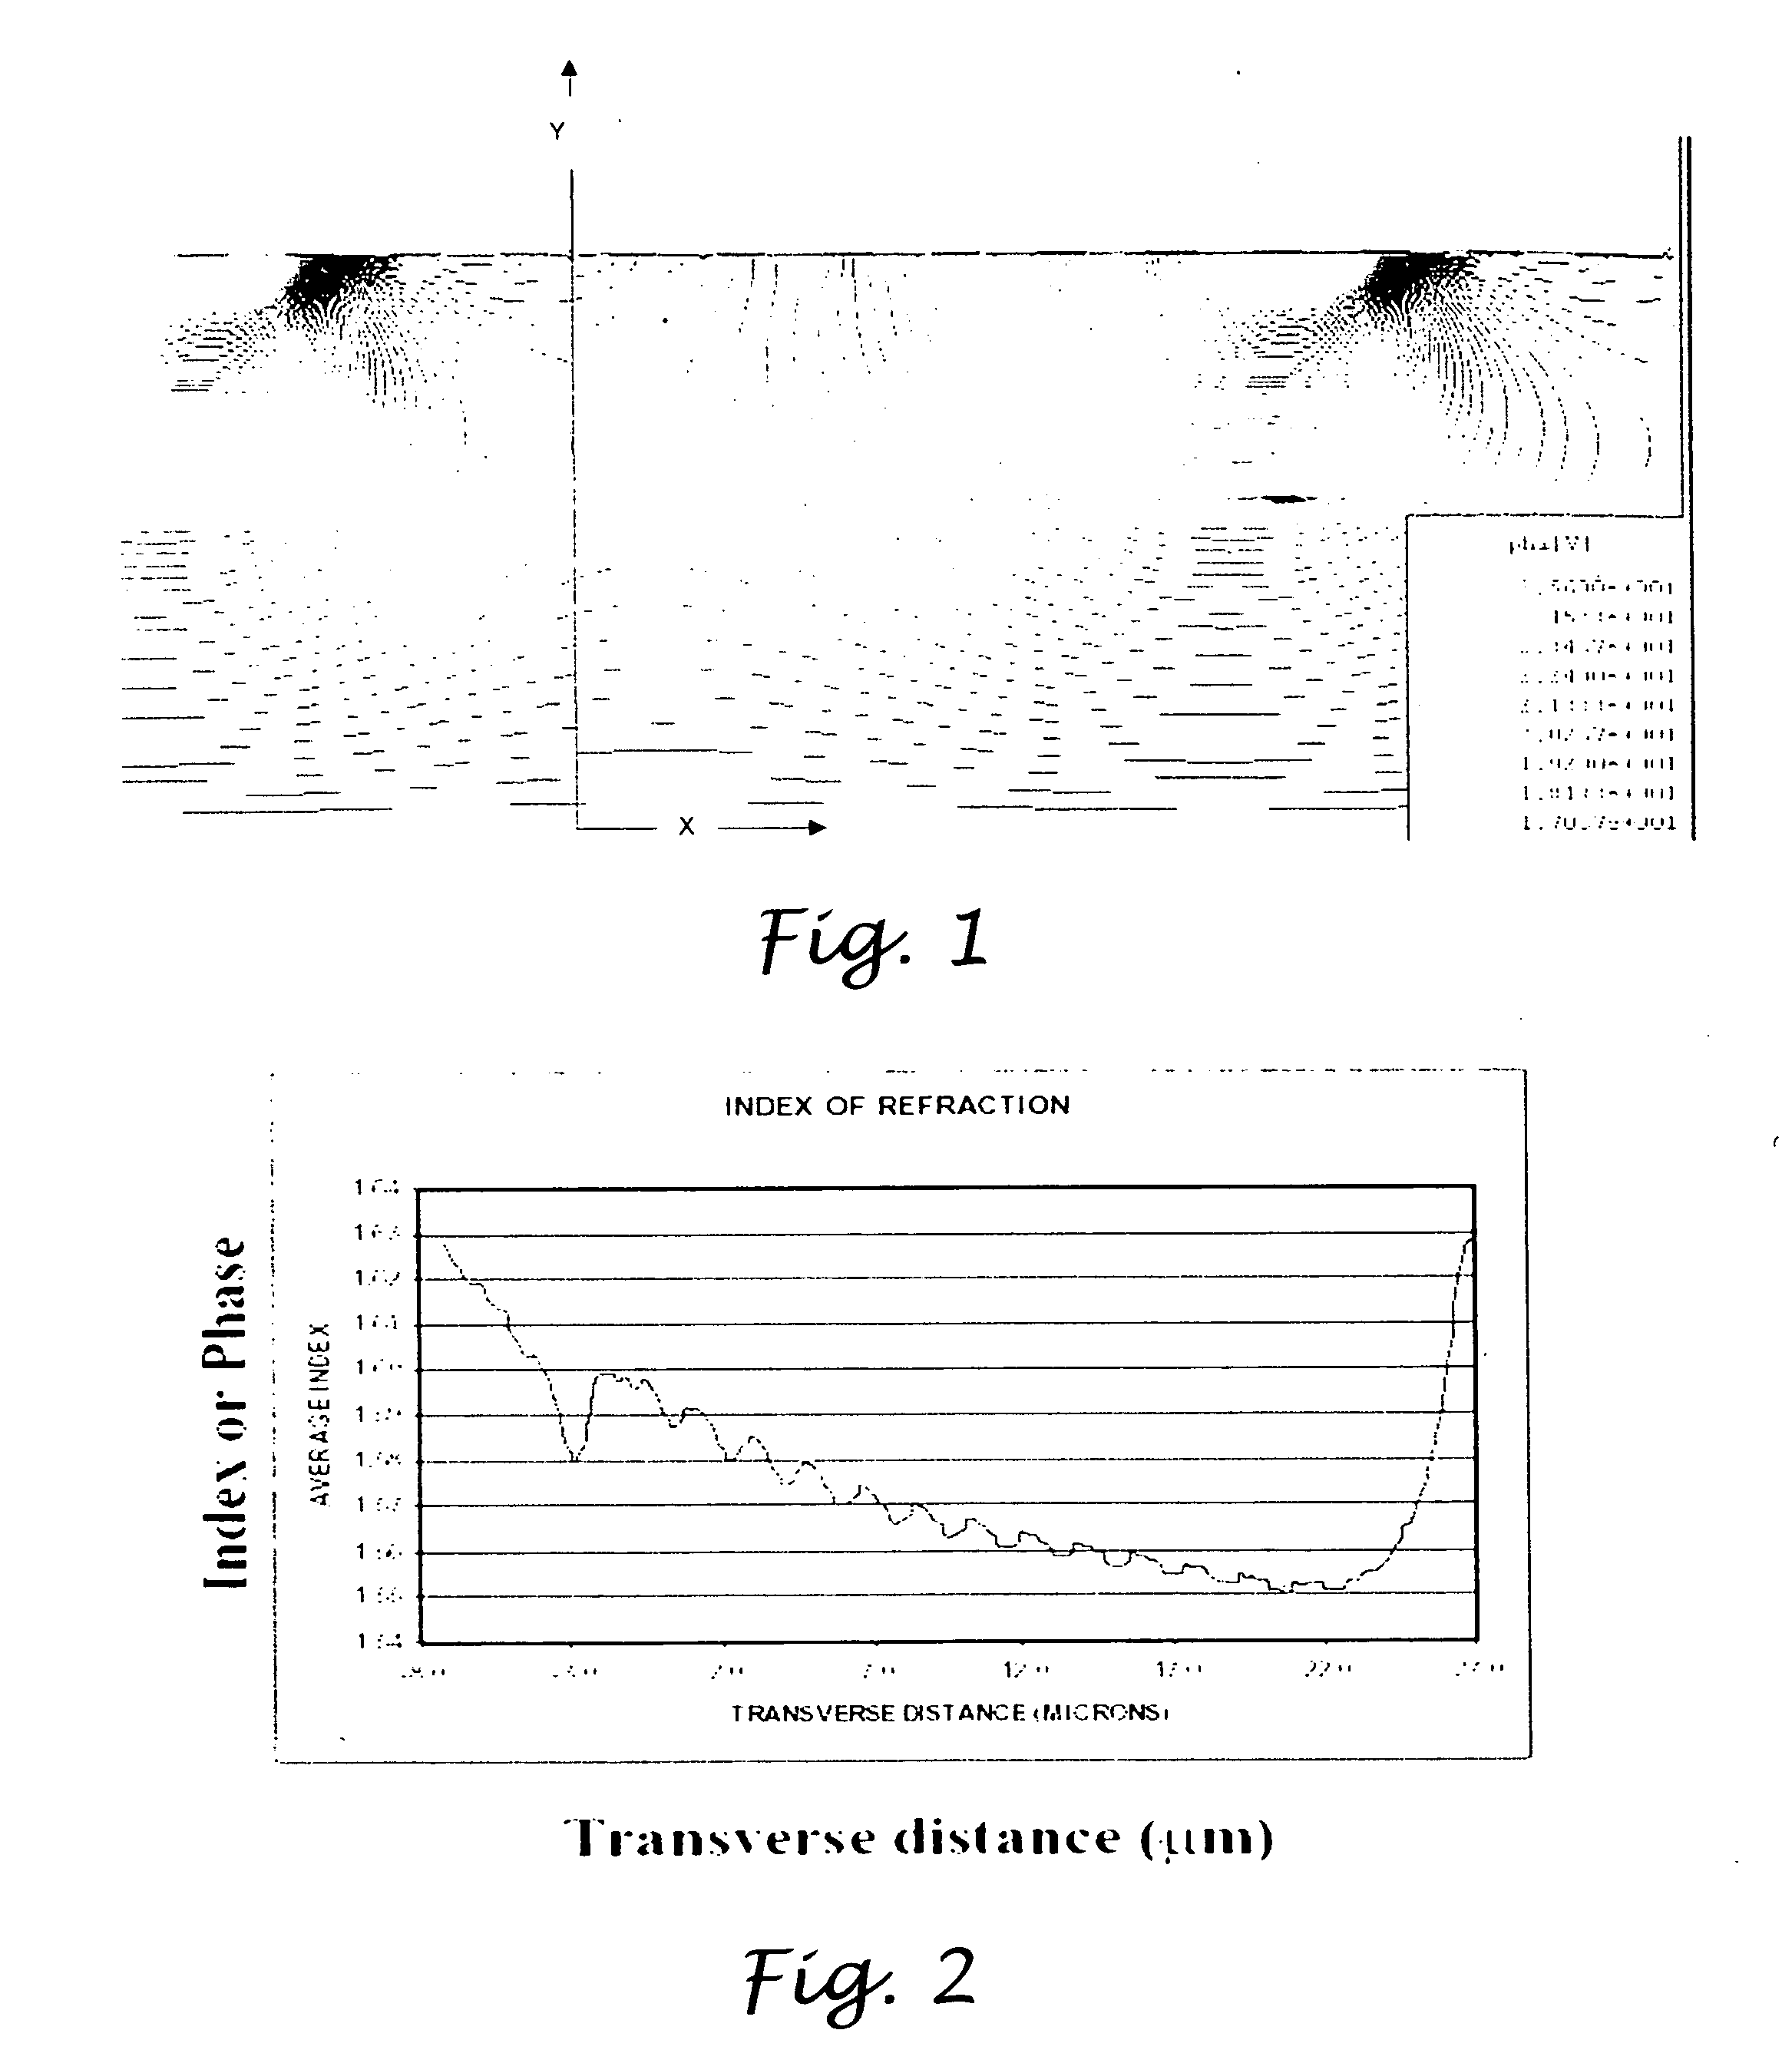 Electro-optic crystal, diffraction-based, beam-steering element